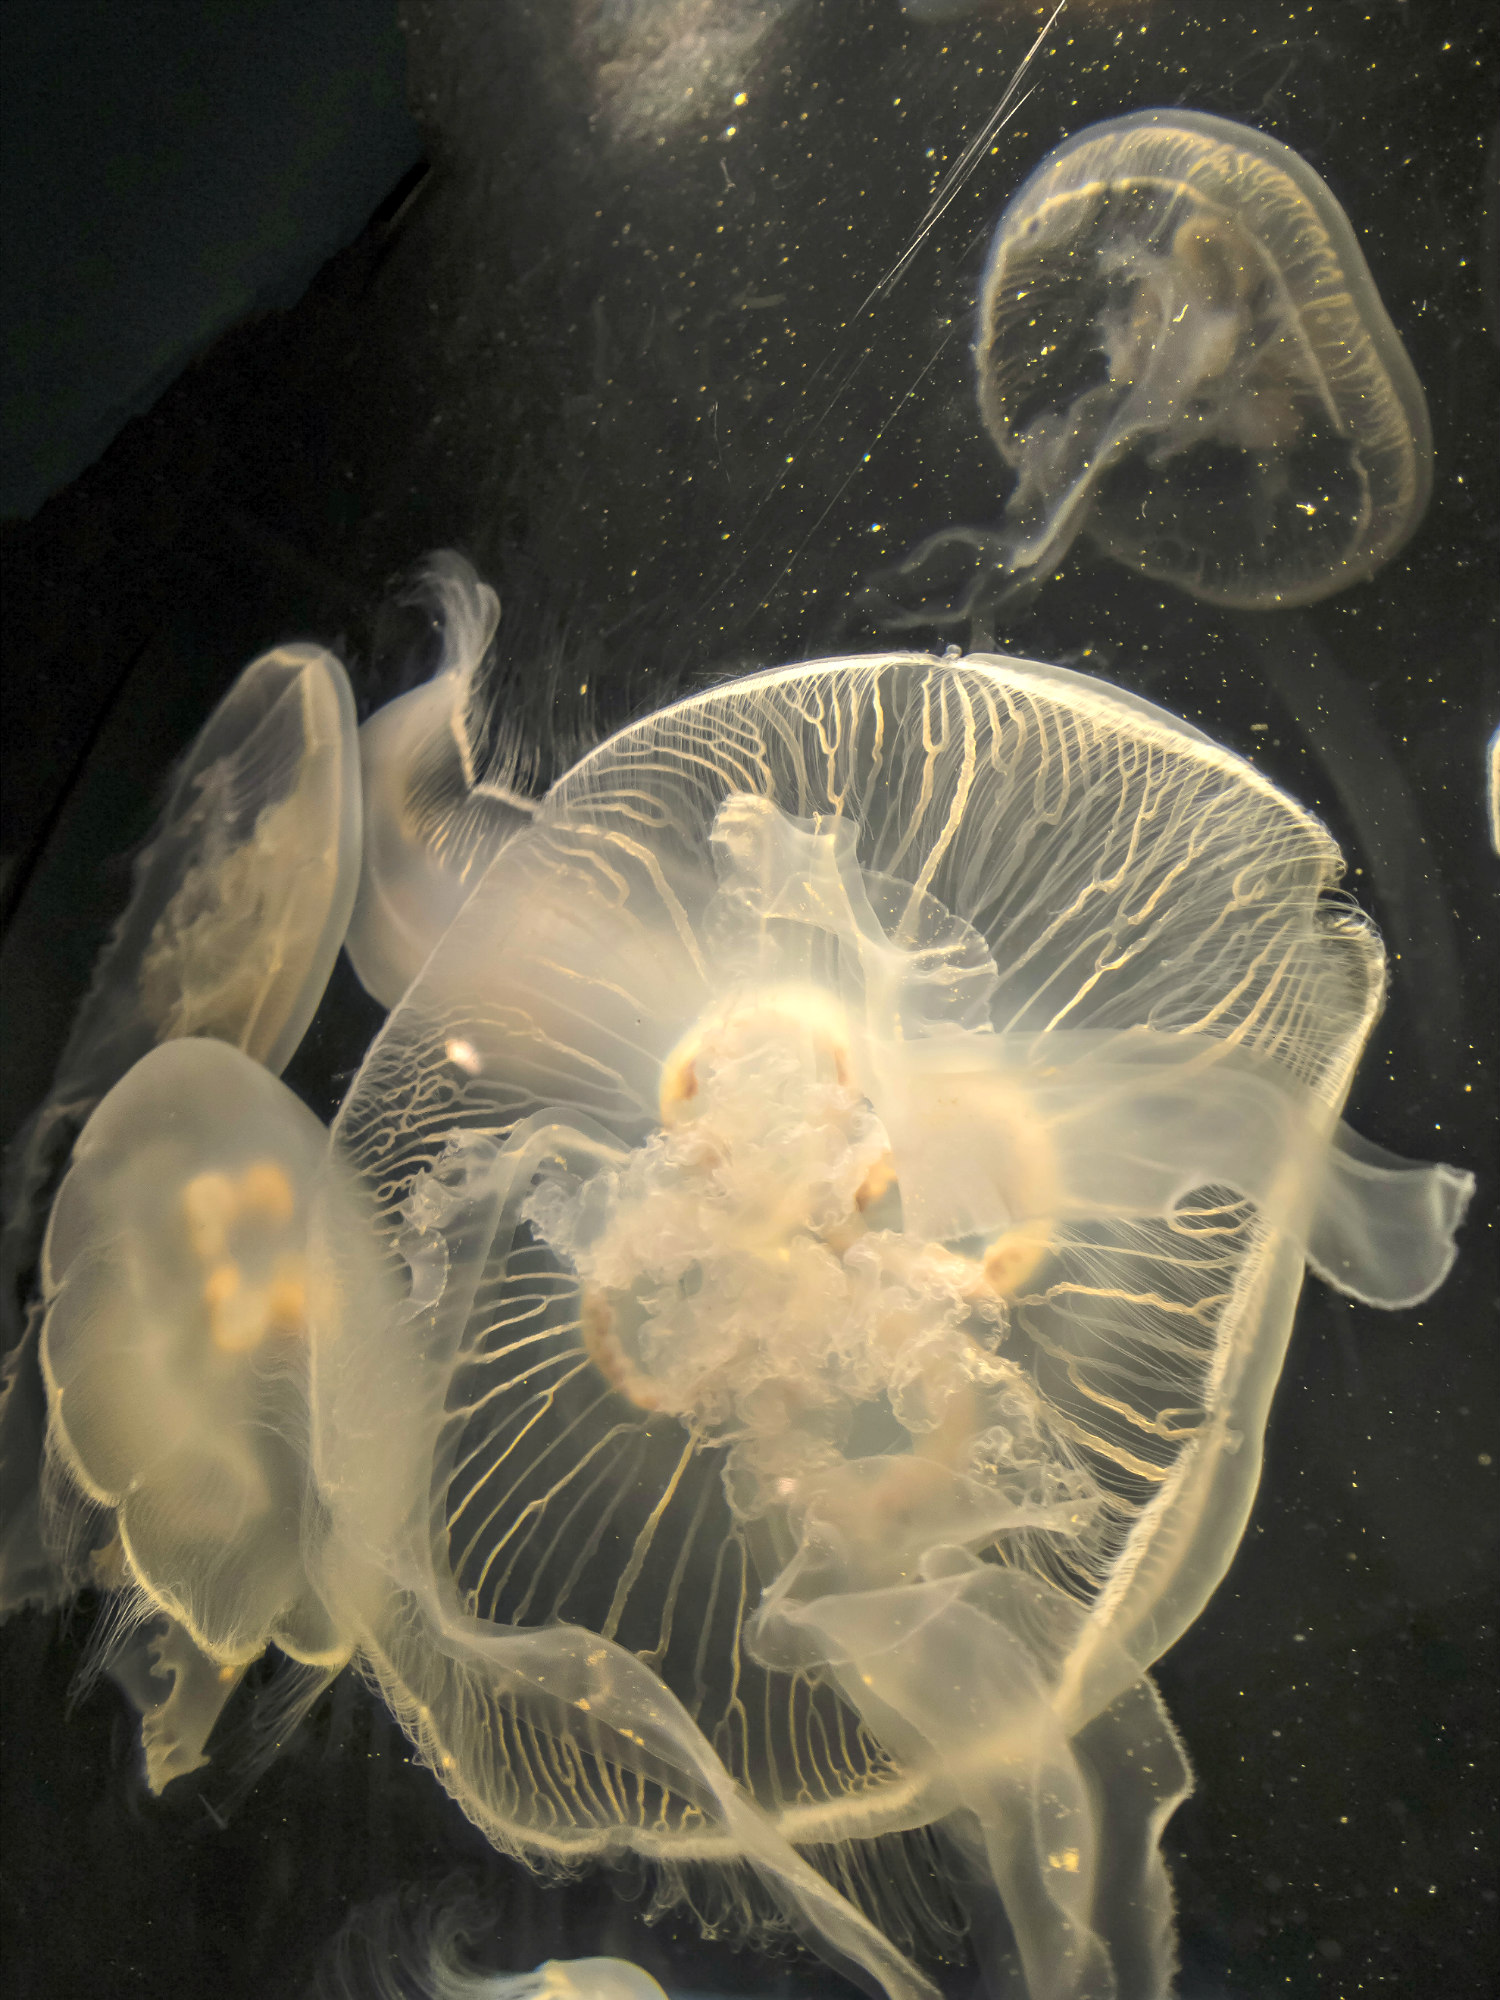 Ivory-colored moon jellyfish swim against a dramatic background.